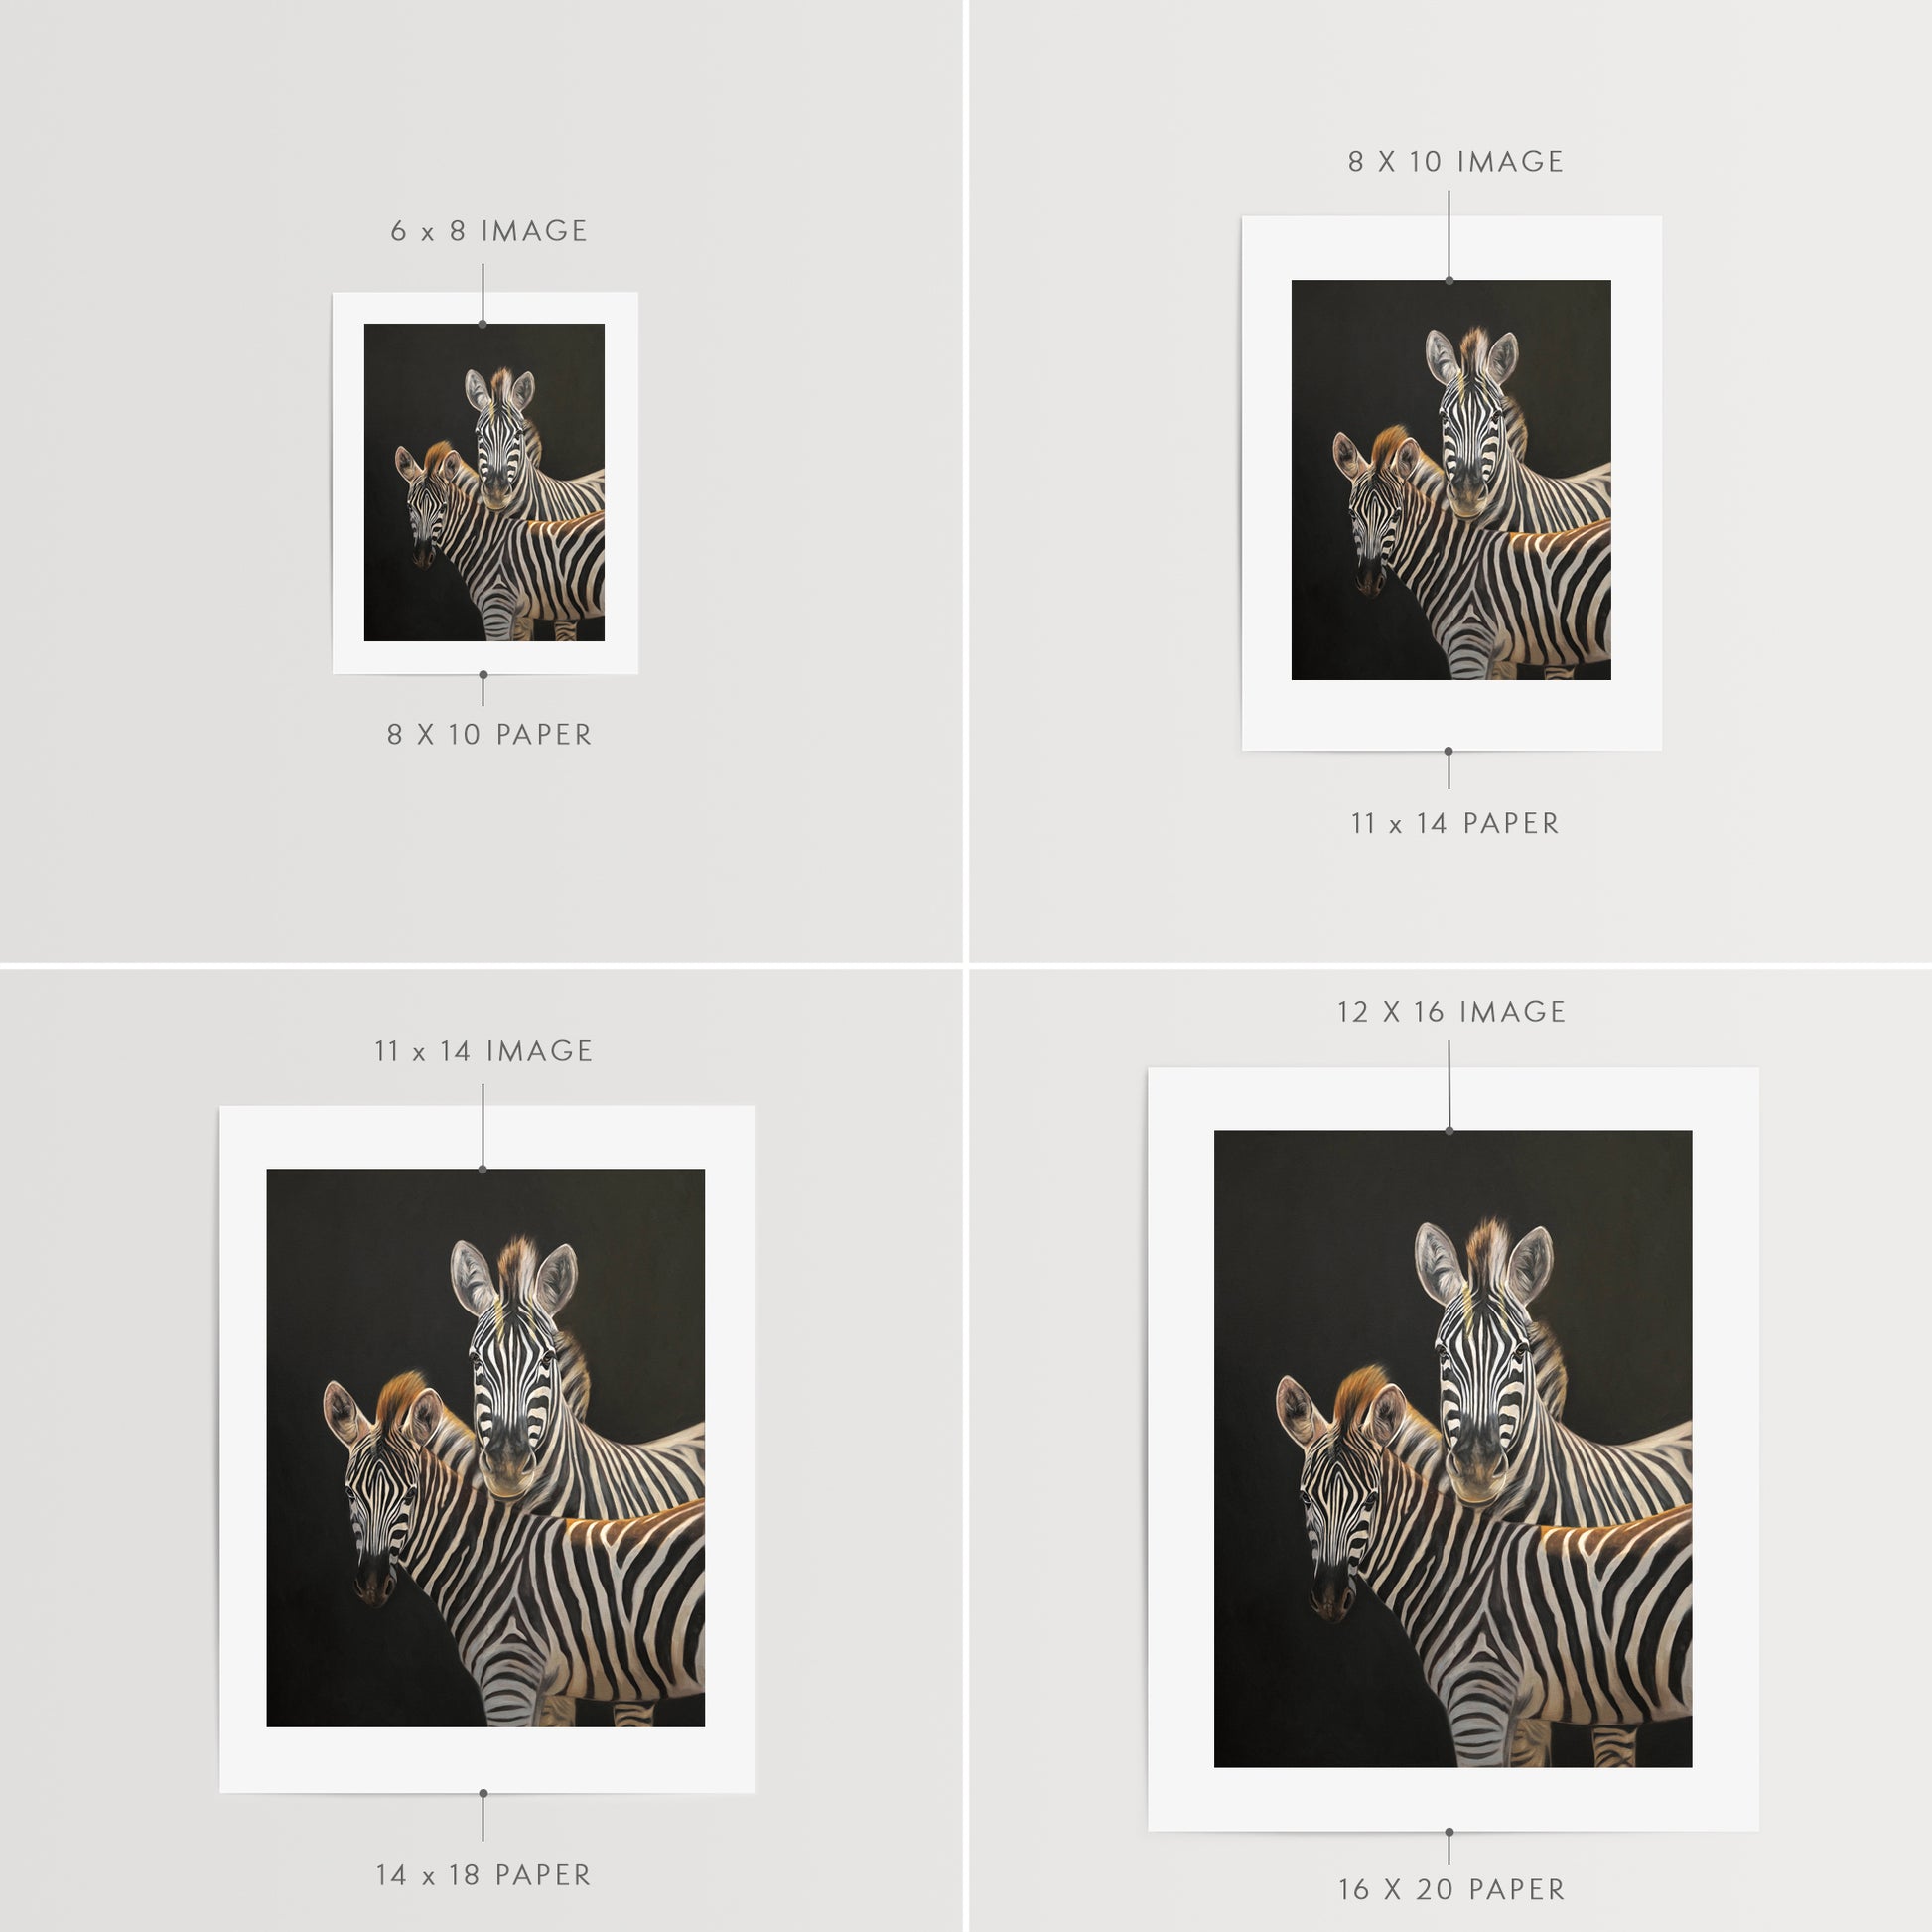 This artwork features a mother and foal zebra with some nice golden backlighting with a neutral dark grey background.